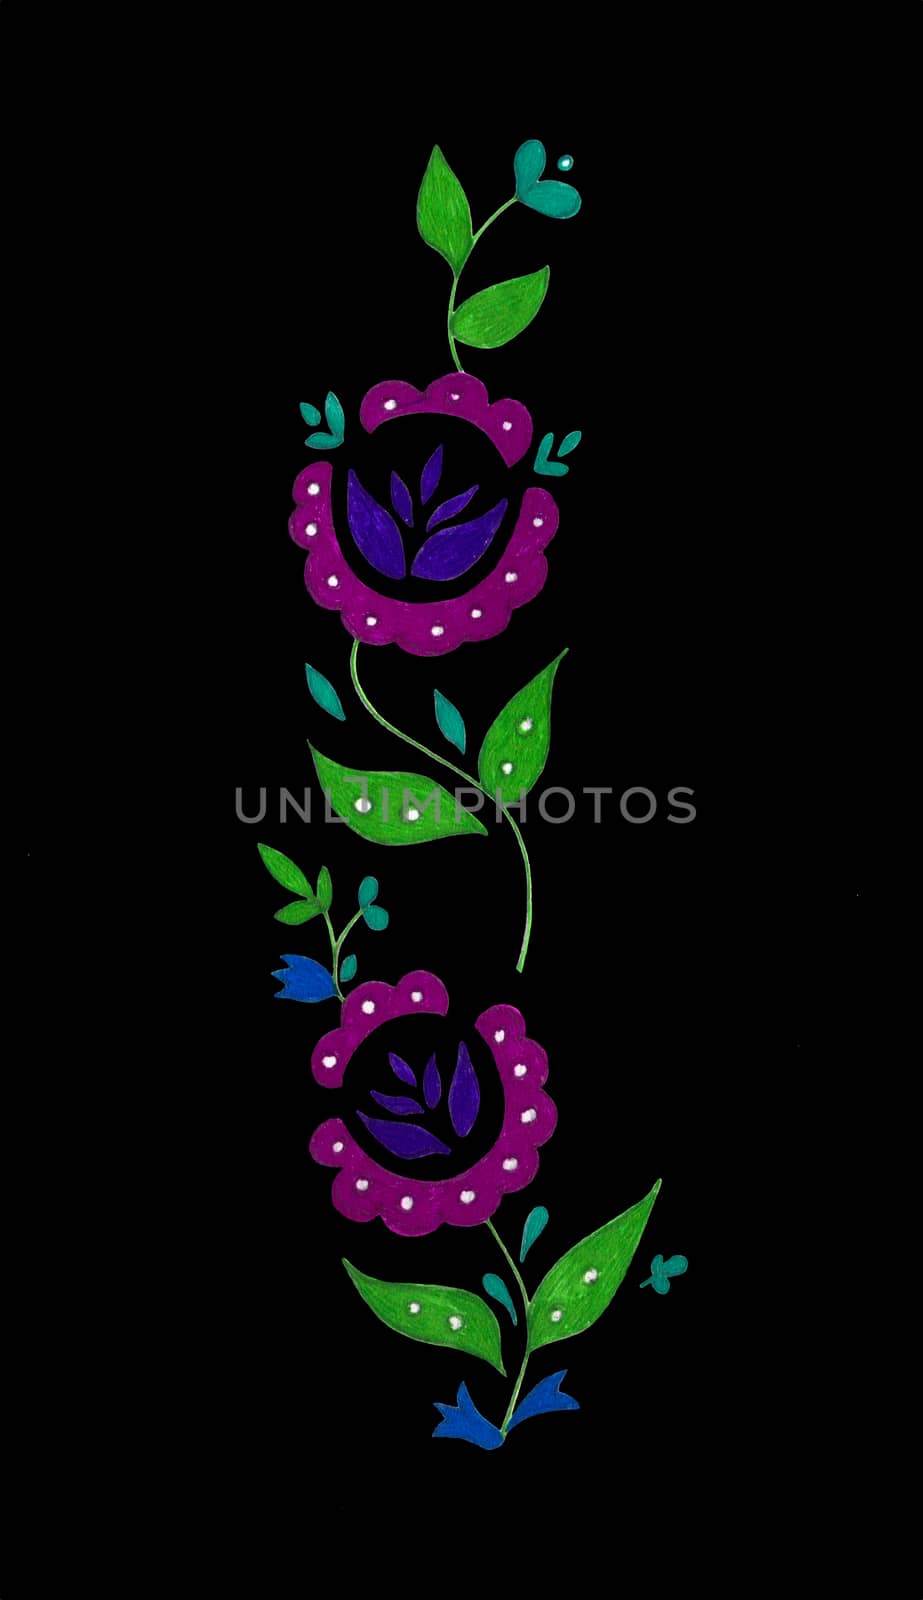 Decorative composition of abstract doodle flowers and leaves. Floral motif illustration. Design element. Hand drawn vertical ornament isolated on black background. by sshisshka